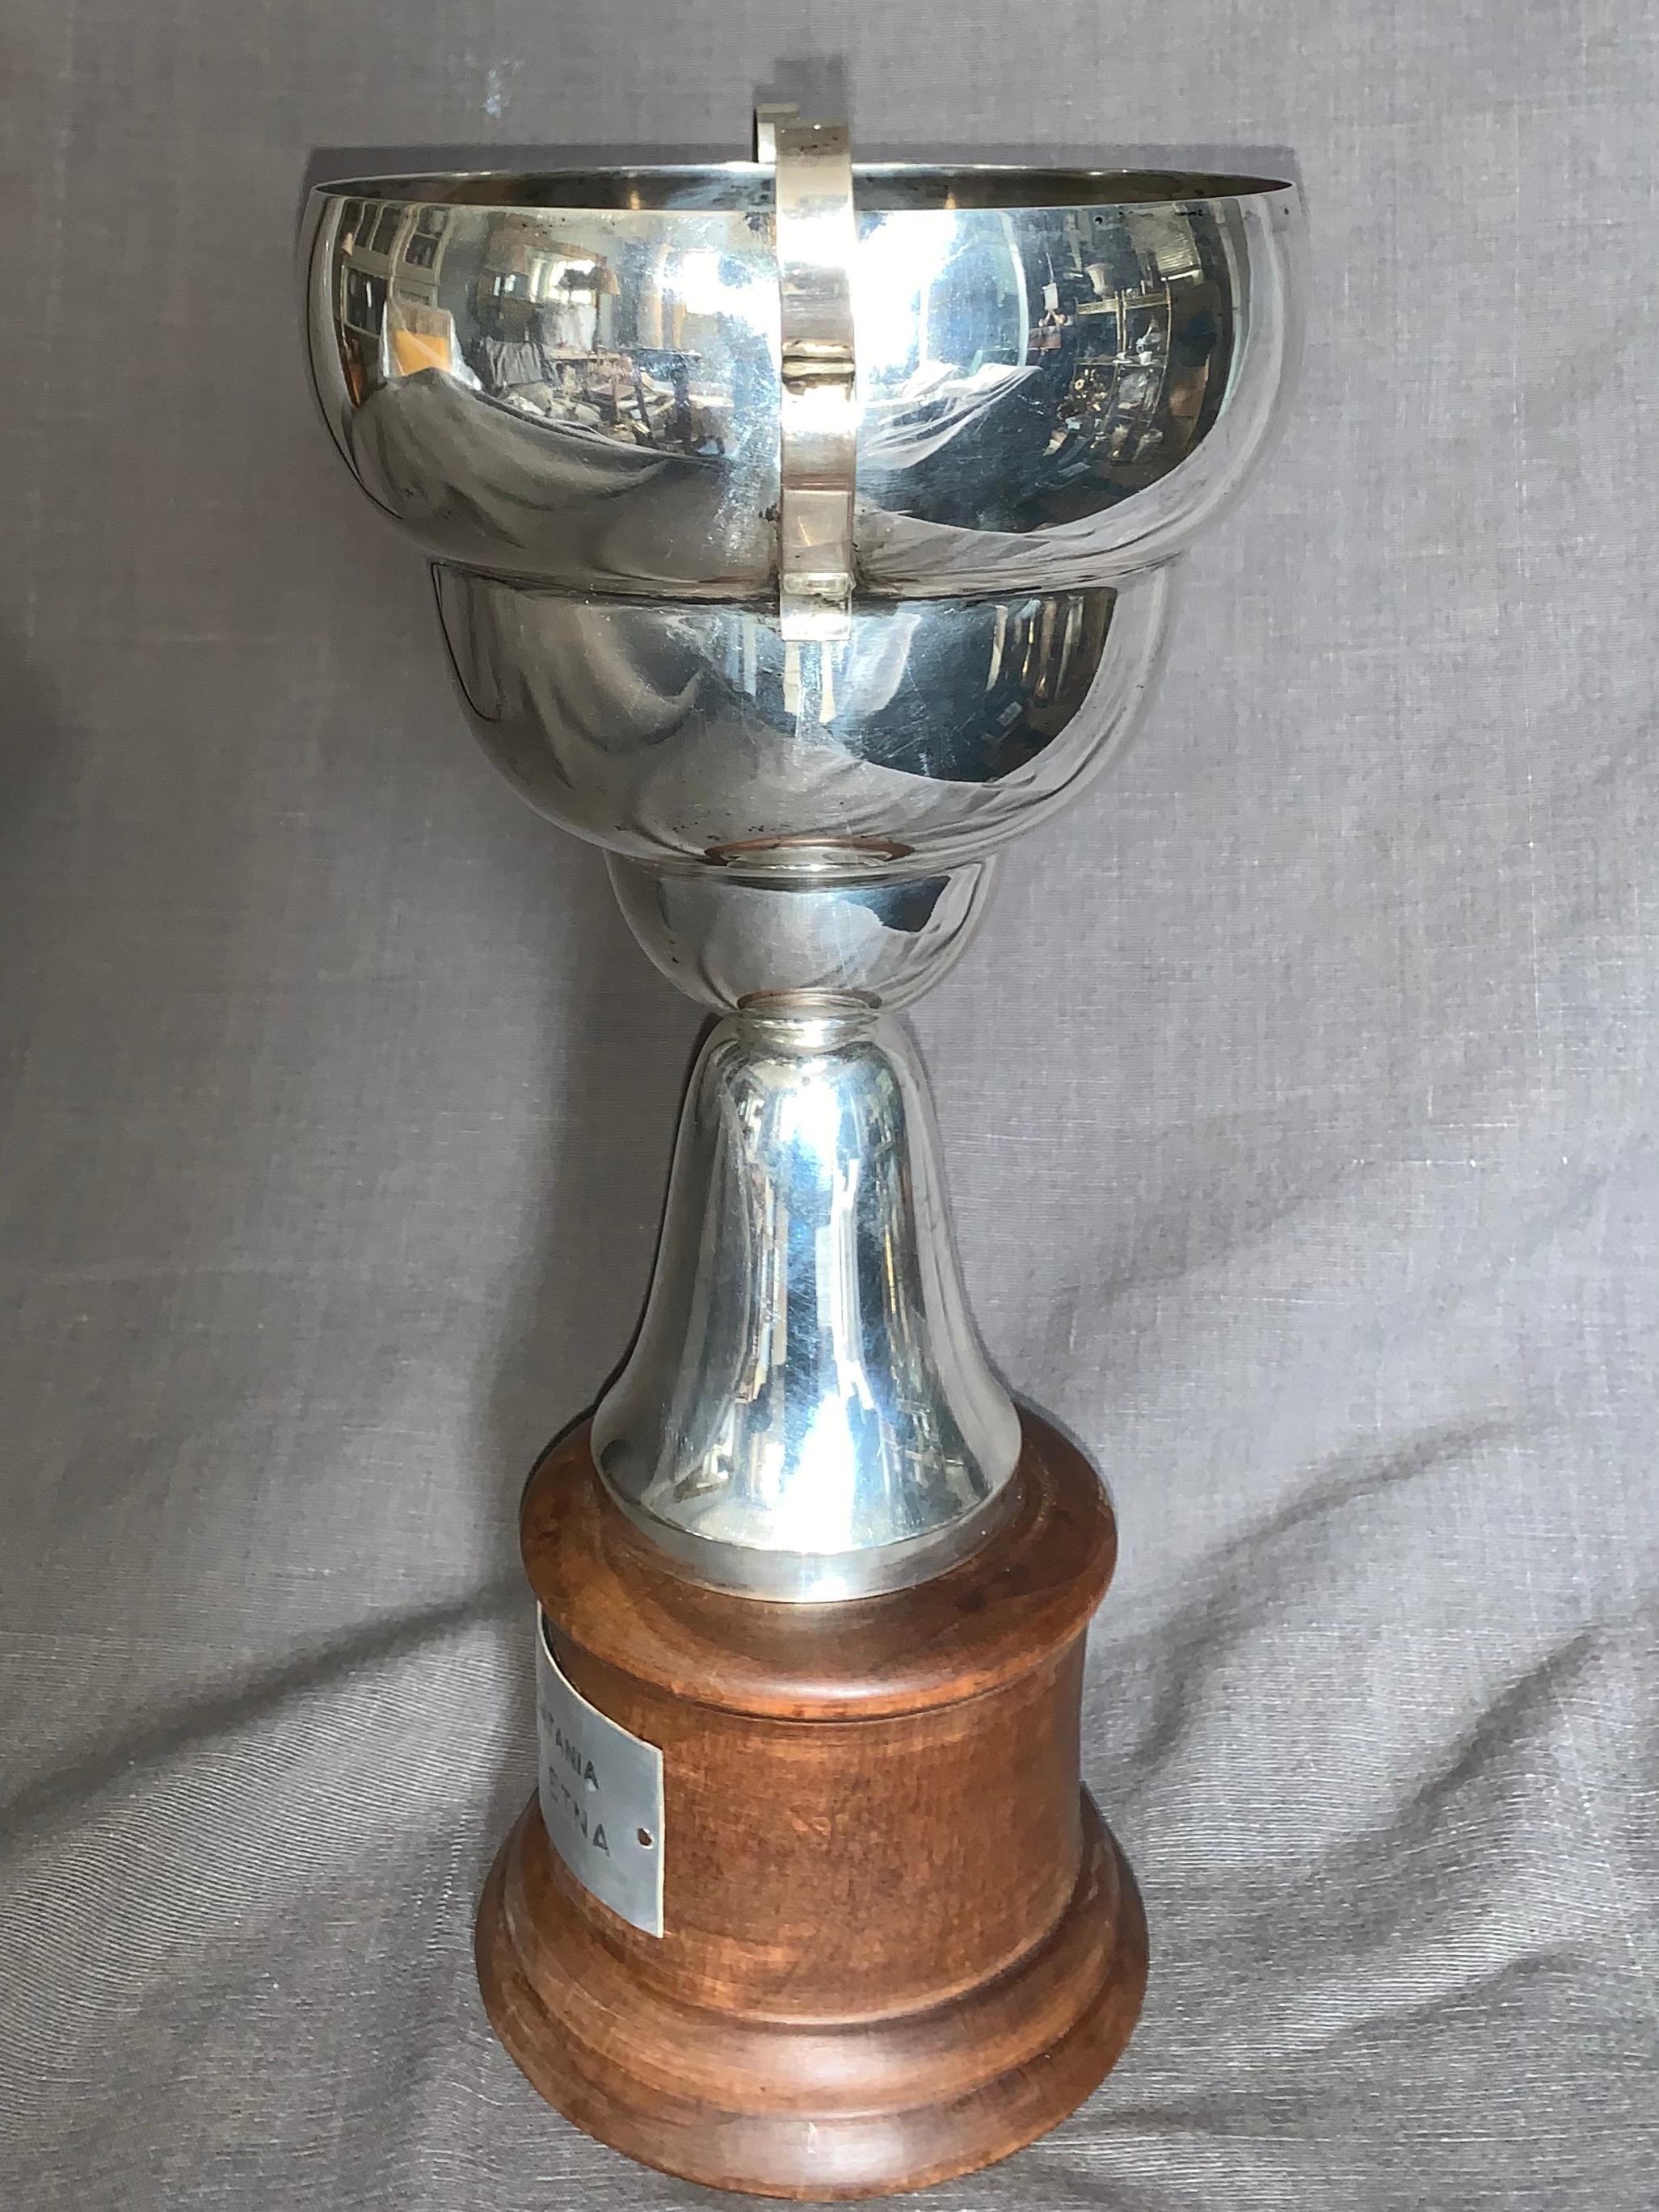 Italian silver racing trophy. Midcentury sterling silver Sicilian motorcycle racing trophy in the Bibendum style on a pale mahogany base with inscription “Moto Club Catania VI Catania Etna”, Italy, late 1960s
Dimensions: 12